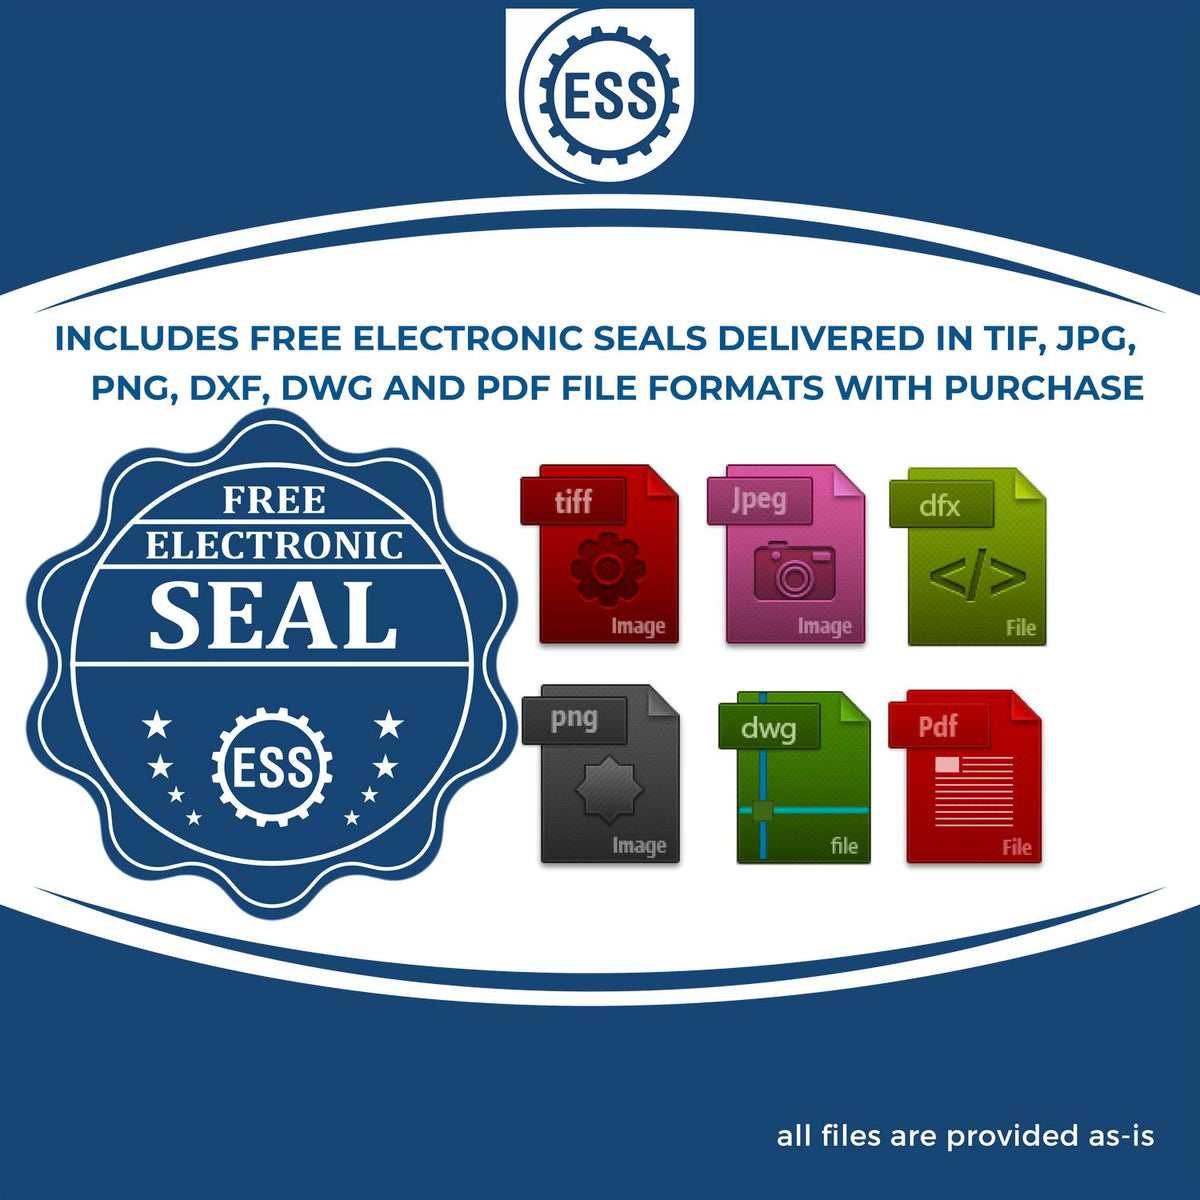 An infographic for the free electronic seal for the State of Idaho Long Reach Architectural Embossing Seal illustrating the different file type icons such as DXF, DWG, TIF, JPG and PNG.